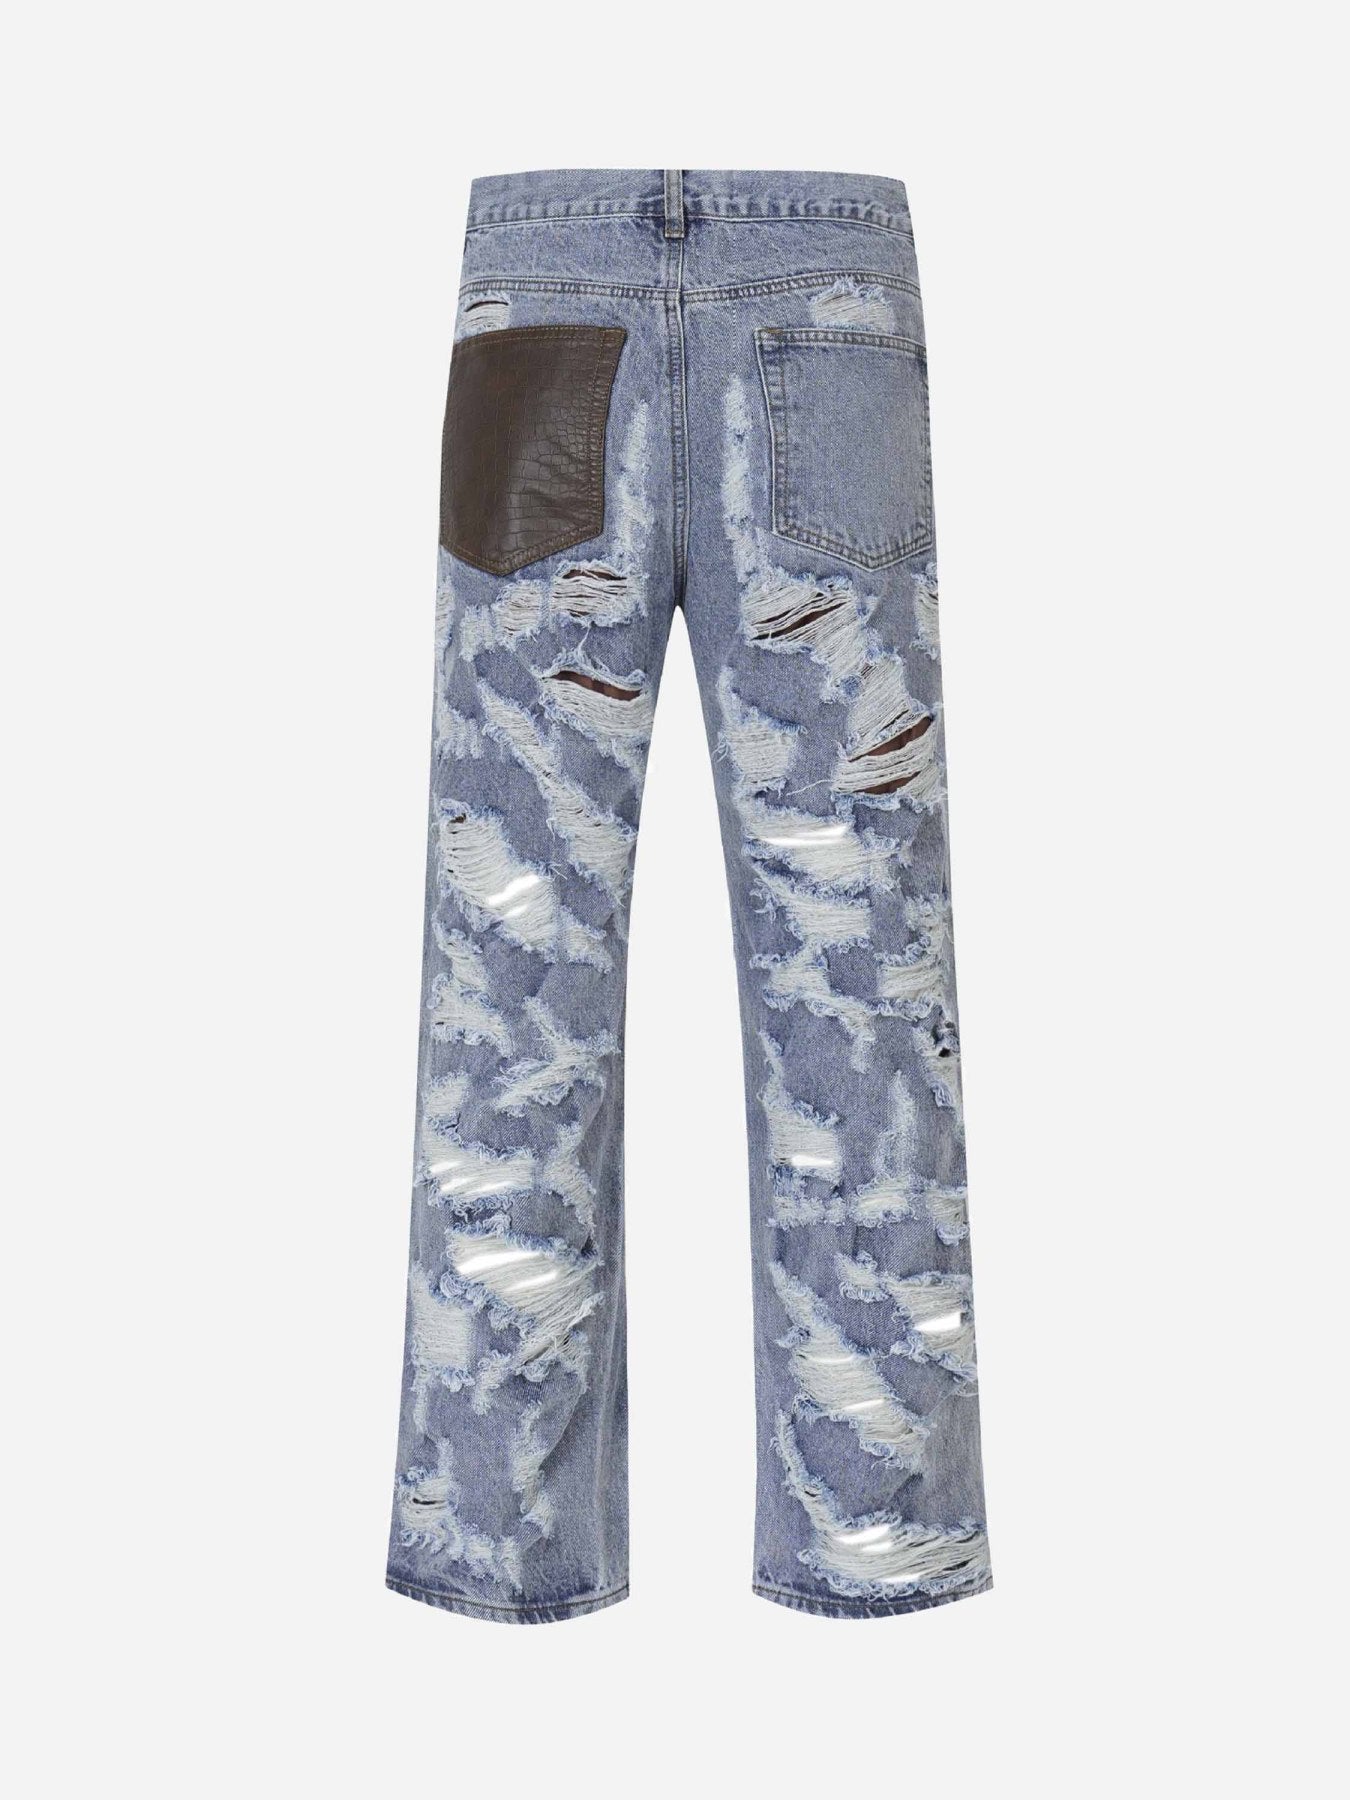 Thesupermade Punk Design Ripped Acid wash Jeans -1553